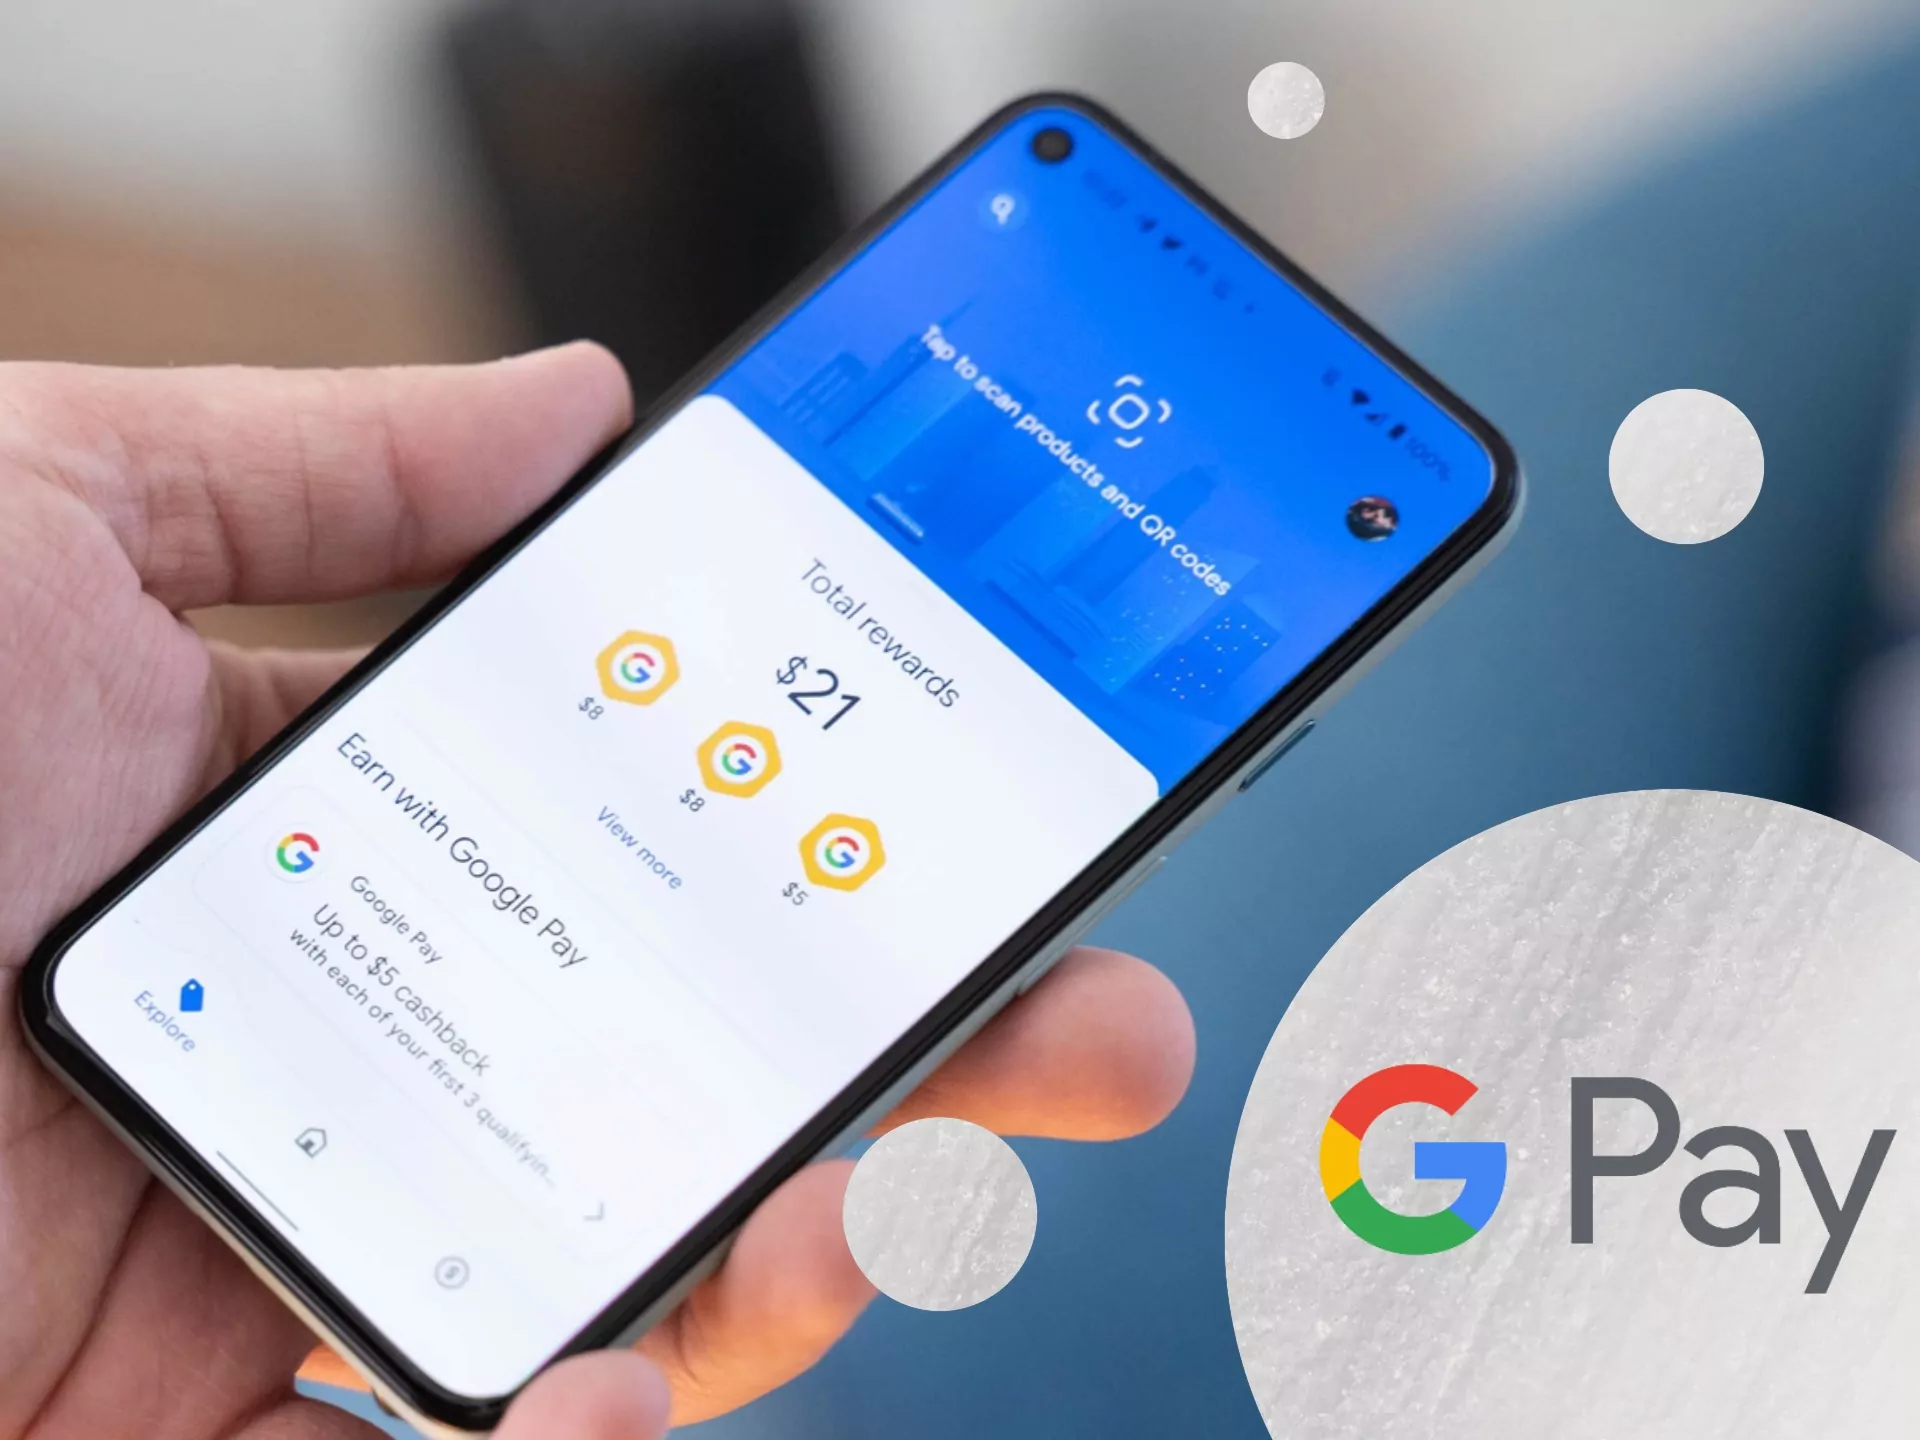 You can download and install the app to use Google Pay safely.